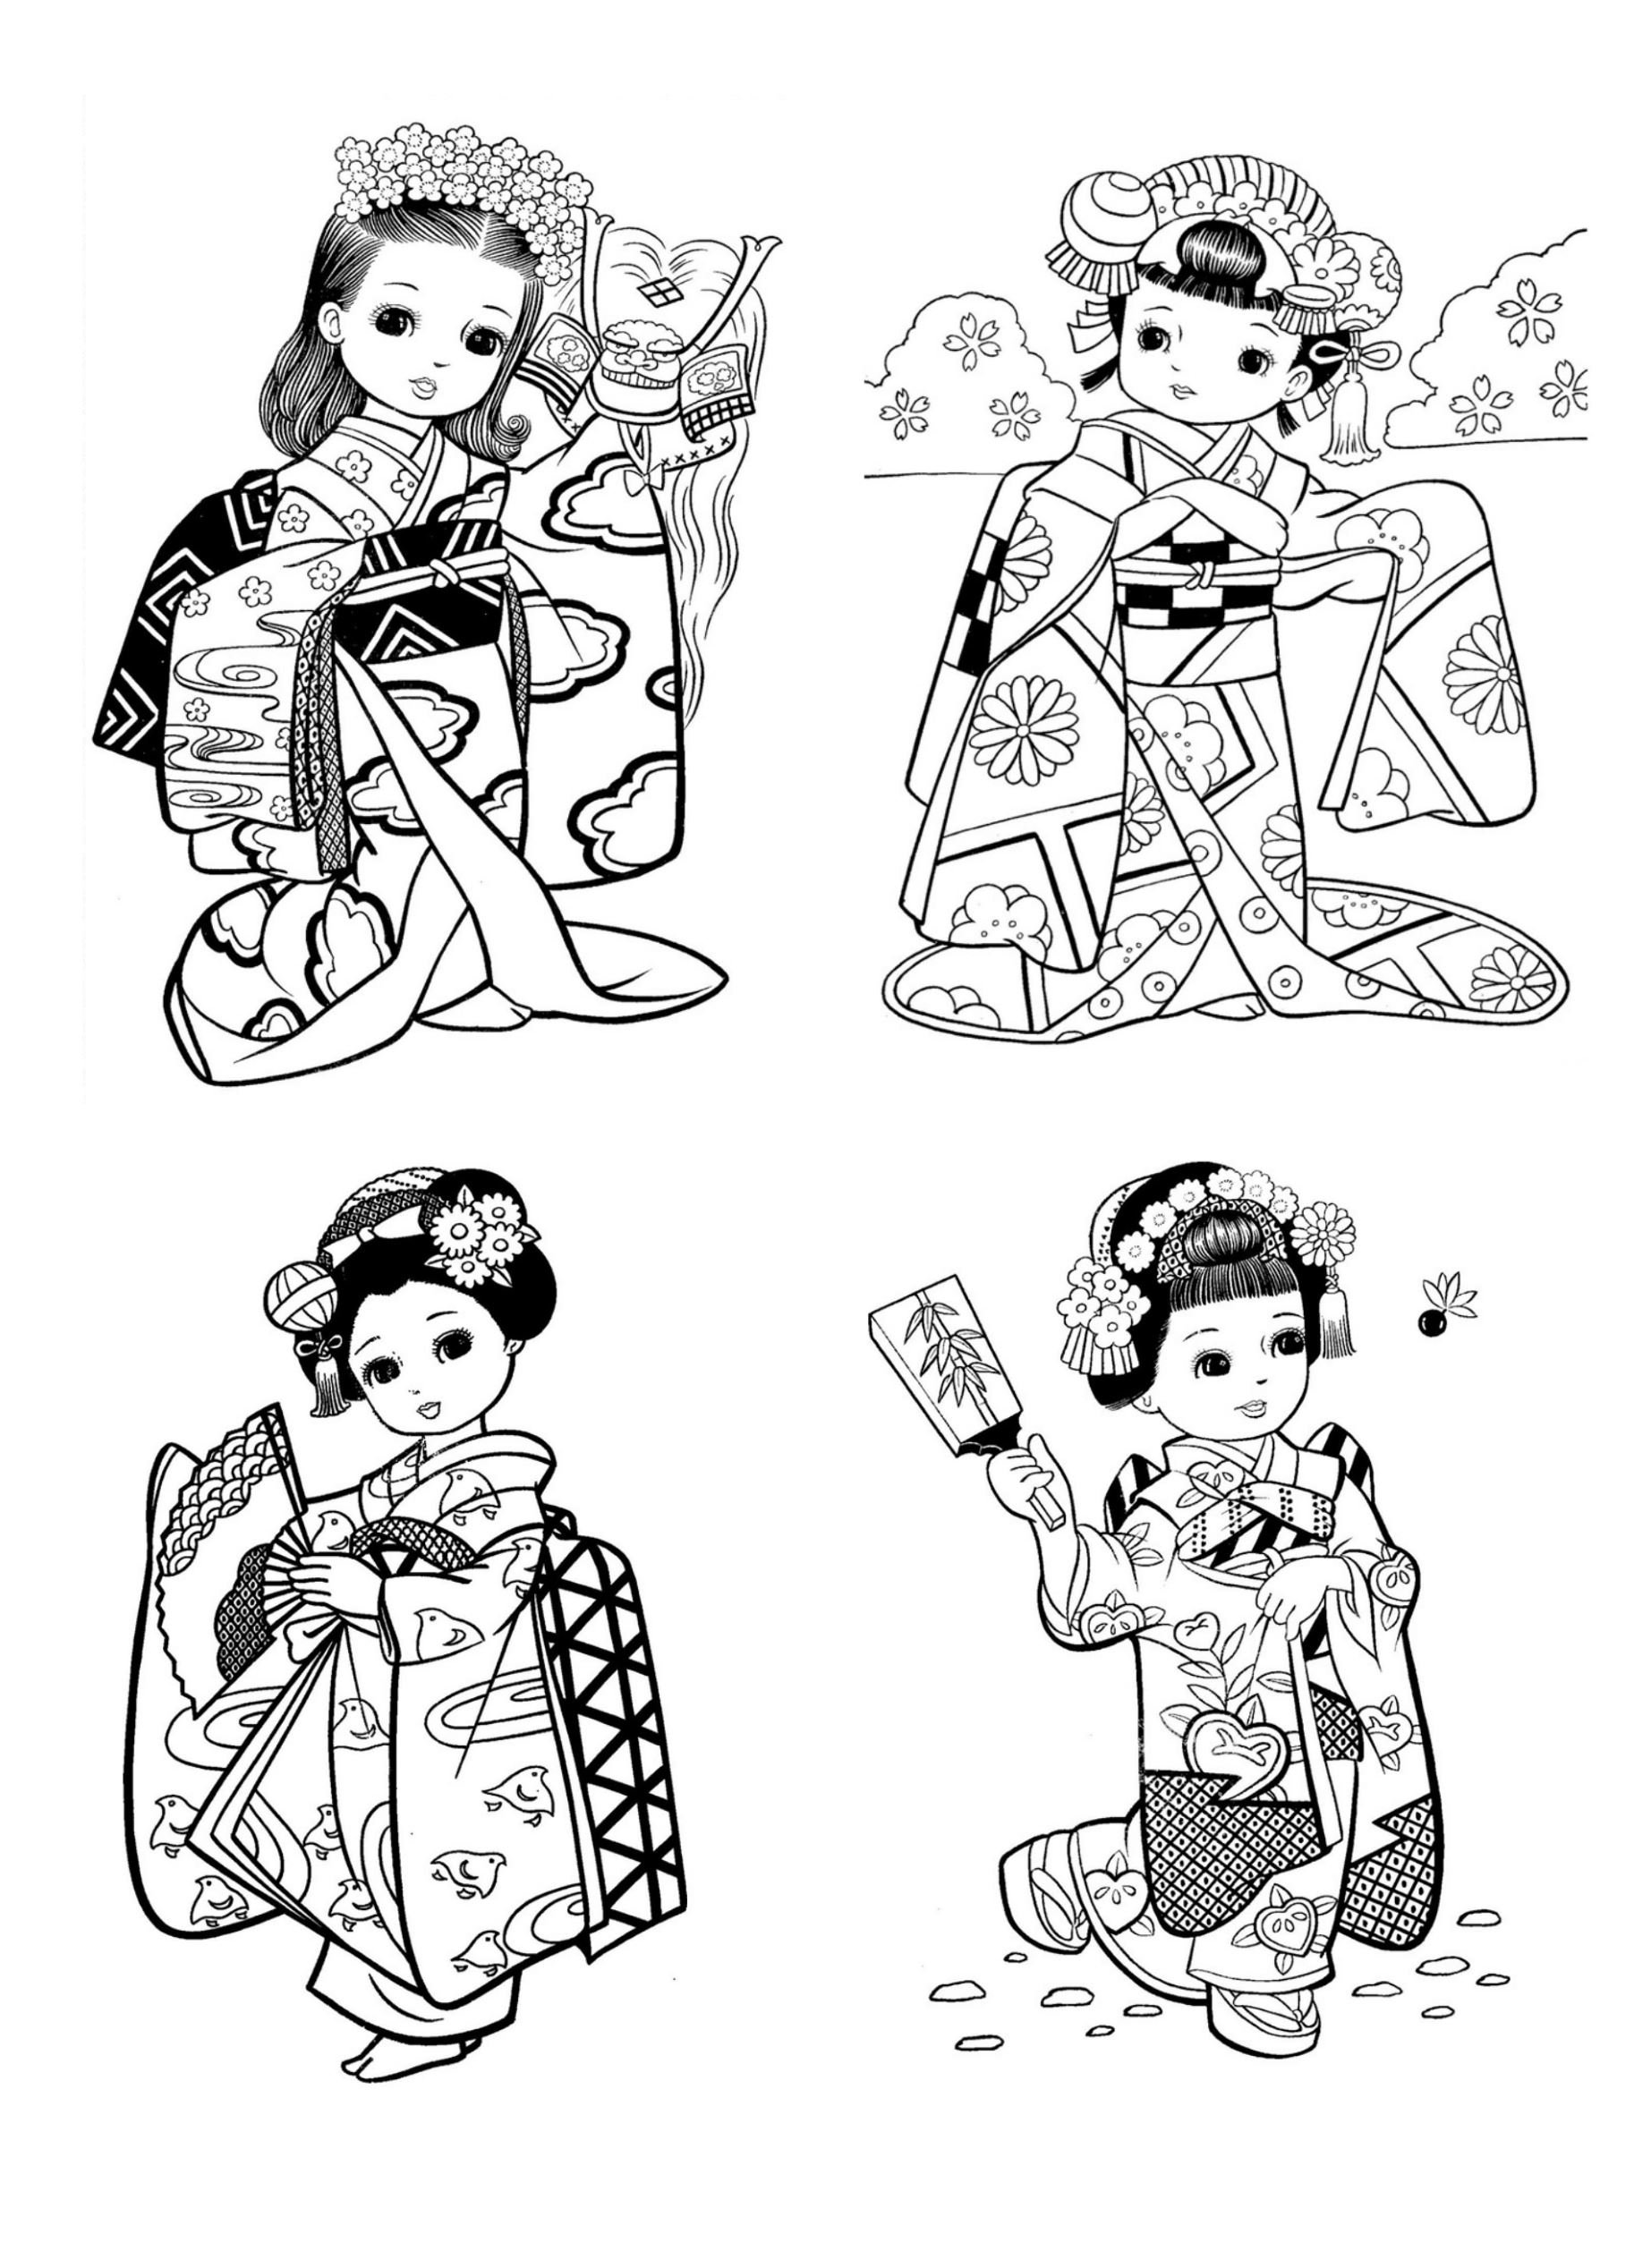 Little japanese child style drawing - Image with : Character, Geisha